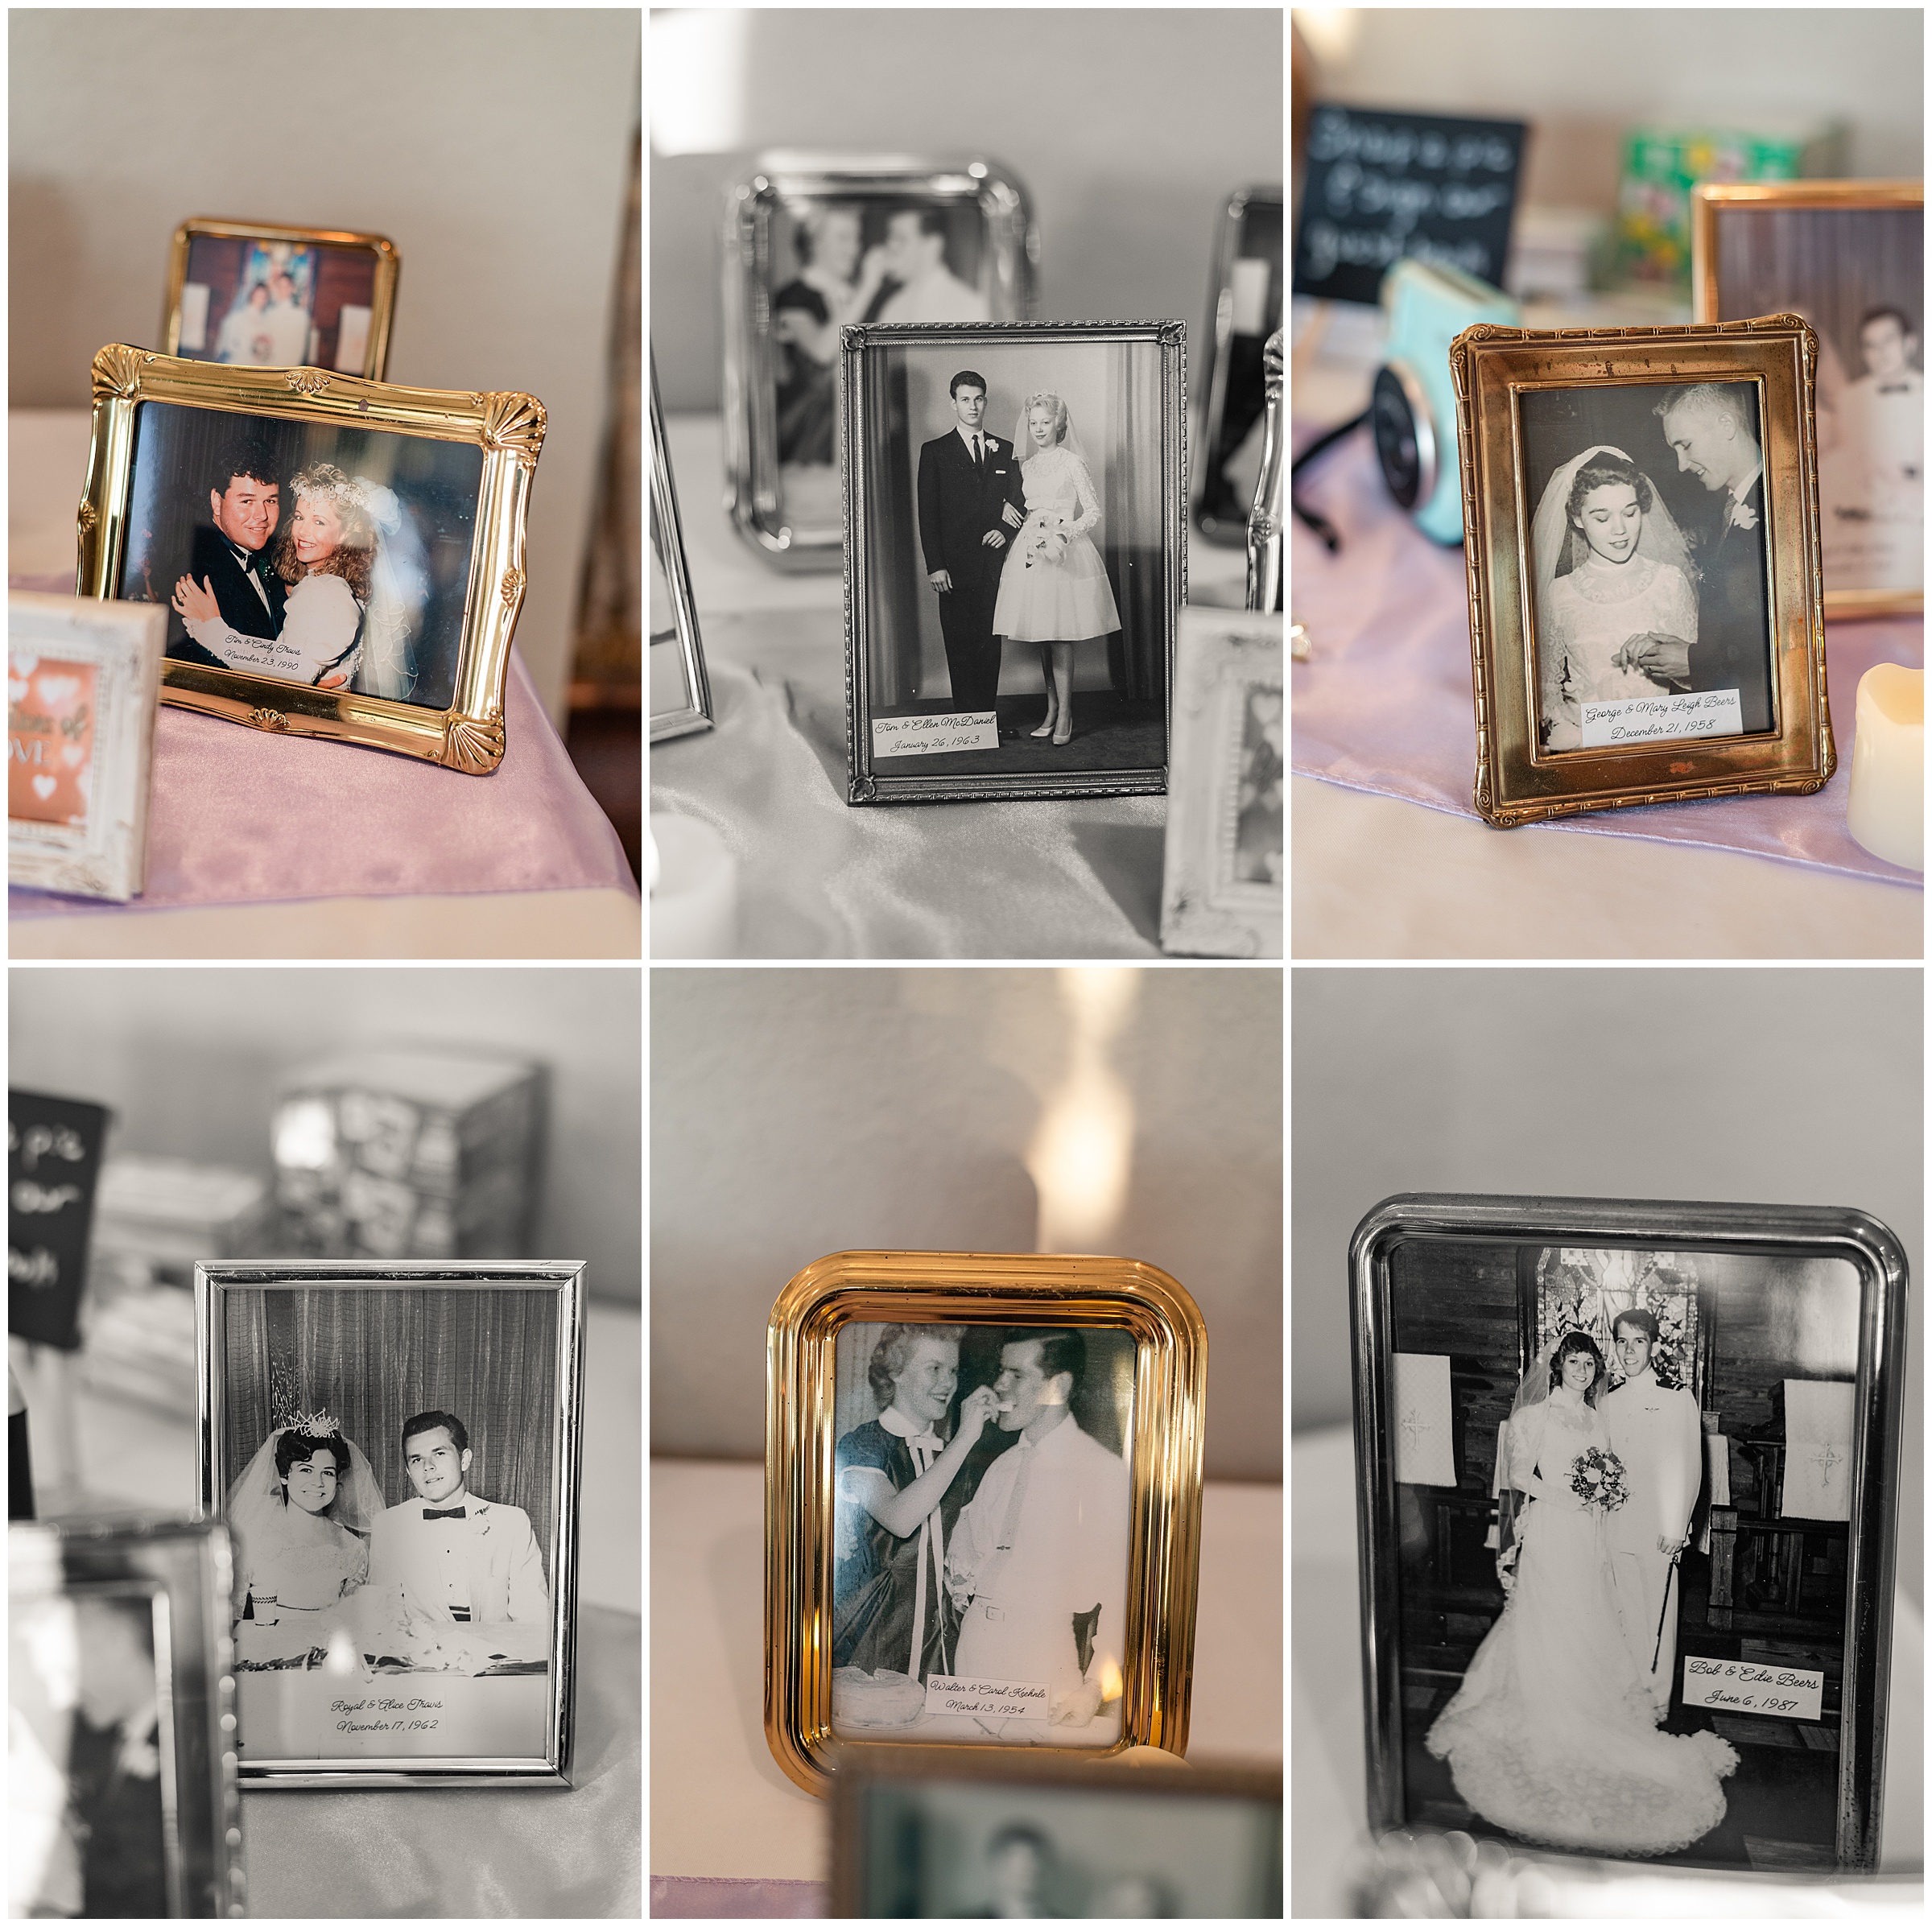 Old wedding photos of family members displayed at a wedding reception at Tampa Bay watch